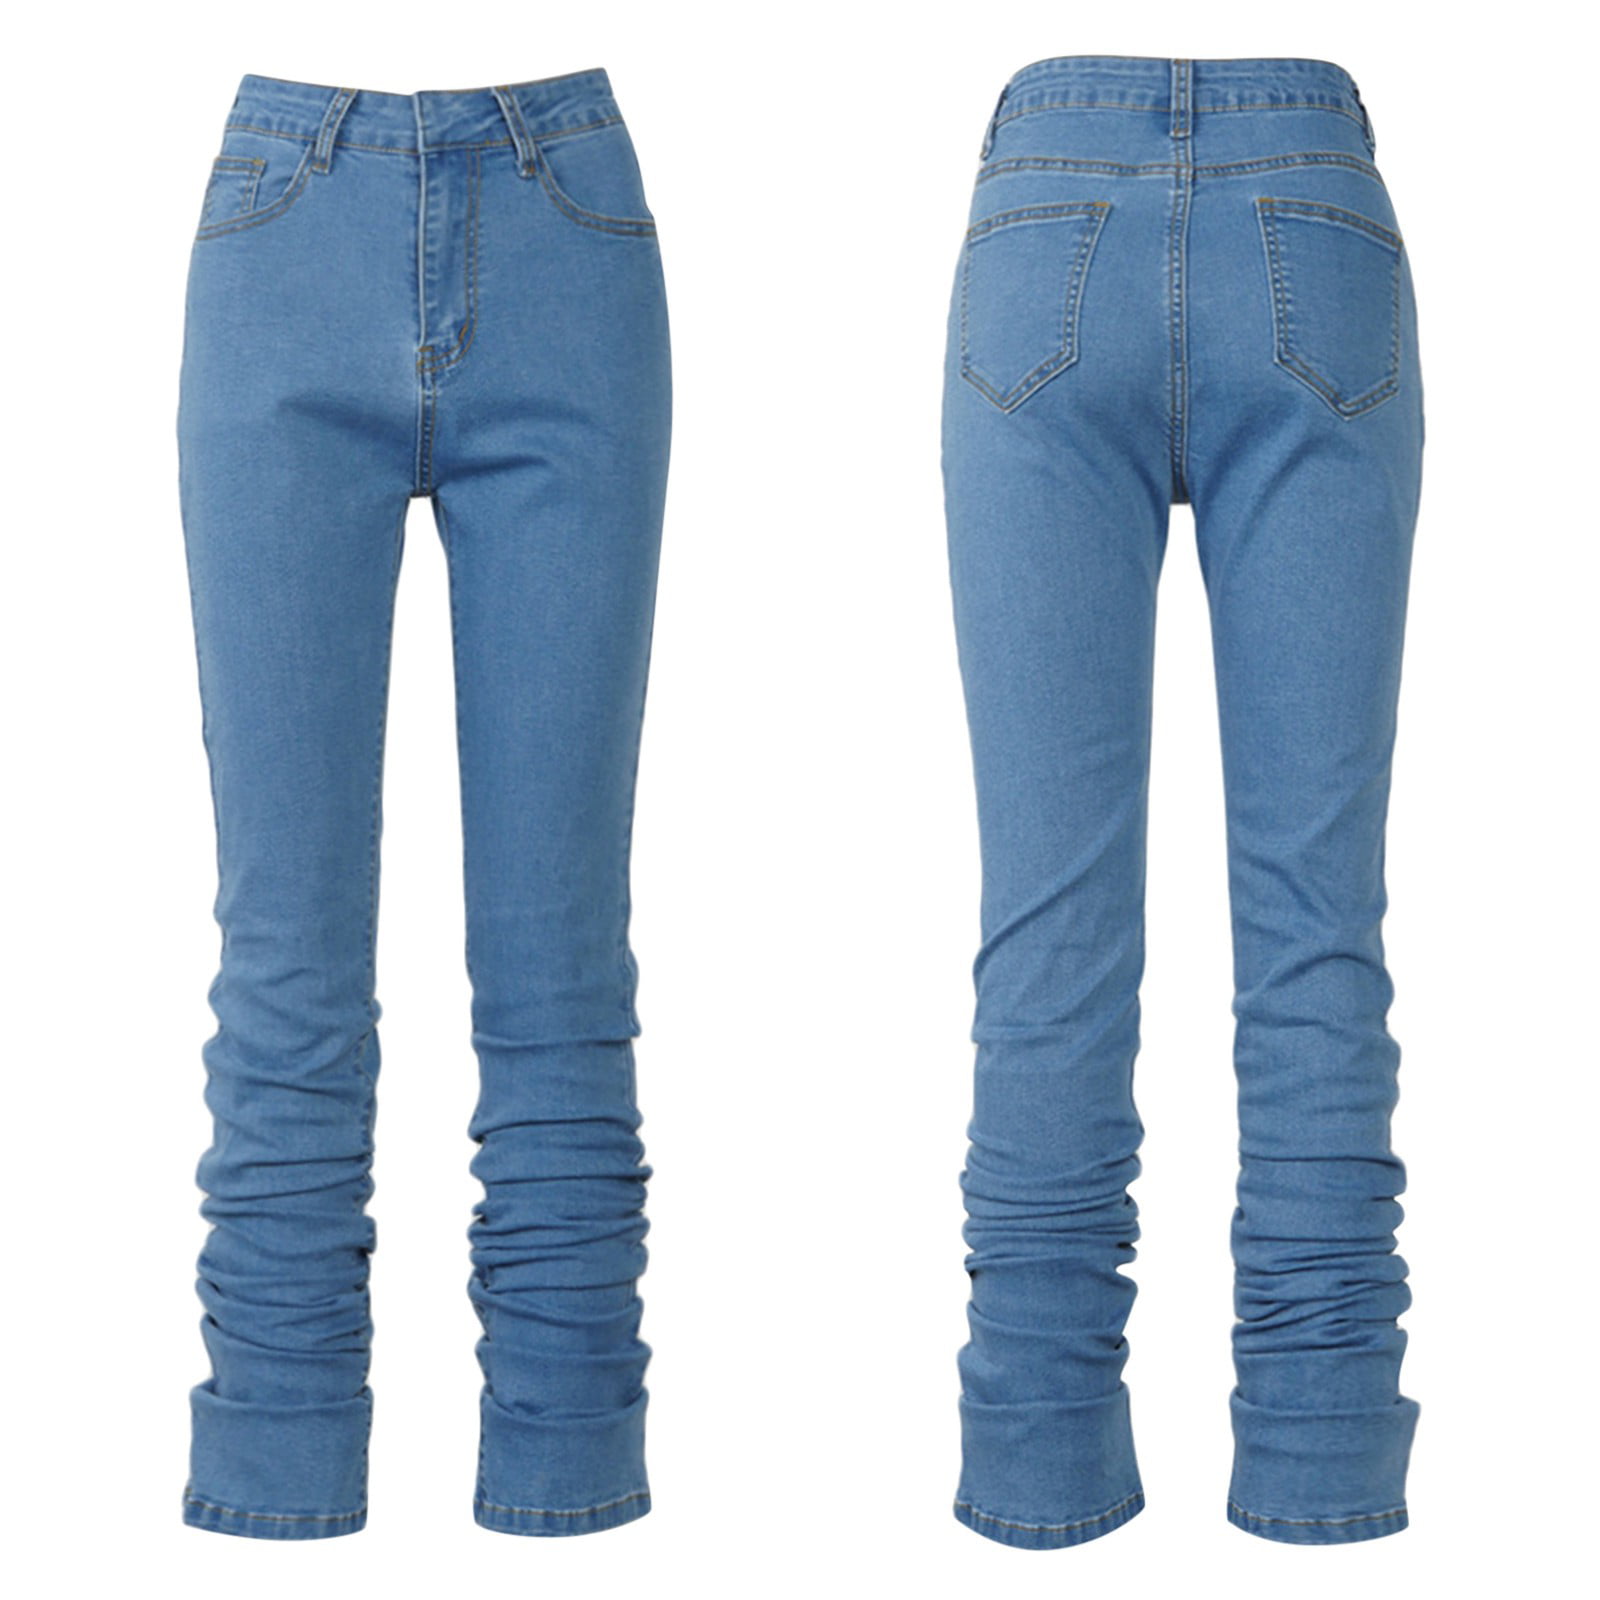 ZKCCNUK Plus Size Mom Jeans Women Casual Solid Color High Waist Skinny Denim Pleated Trousers Jeans Summer Casual Jeans on Clearance - Walmart.com